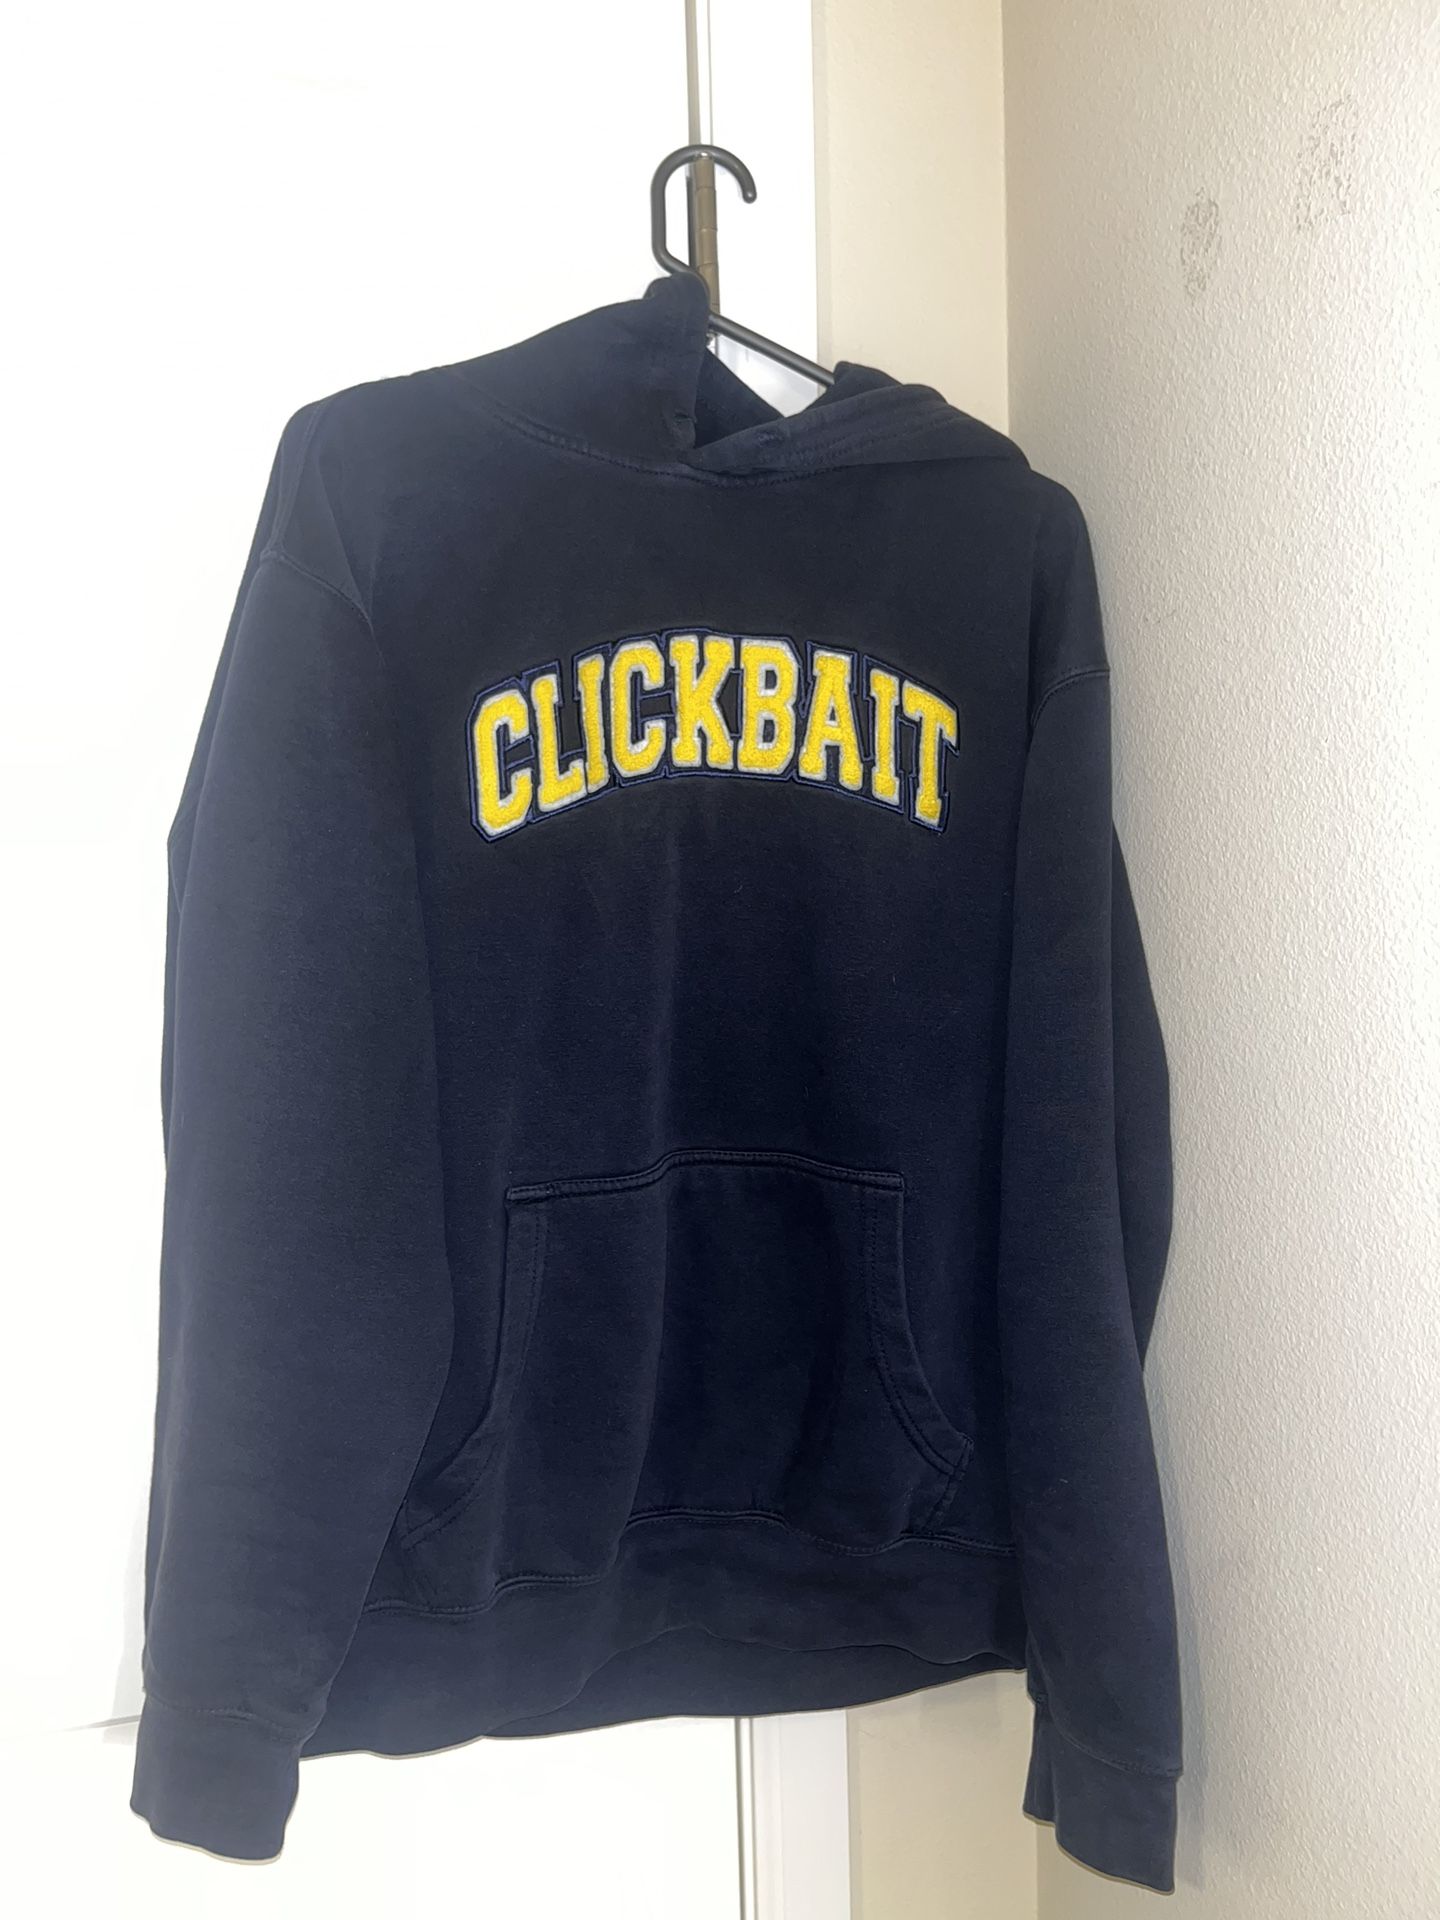 Clickbait Hoodie Size Large (Barely Worn) 